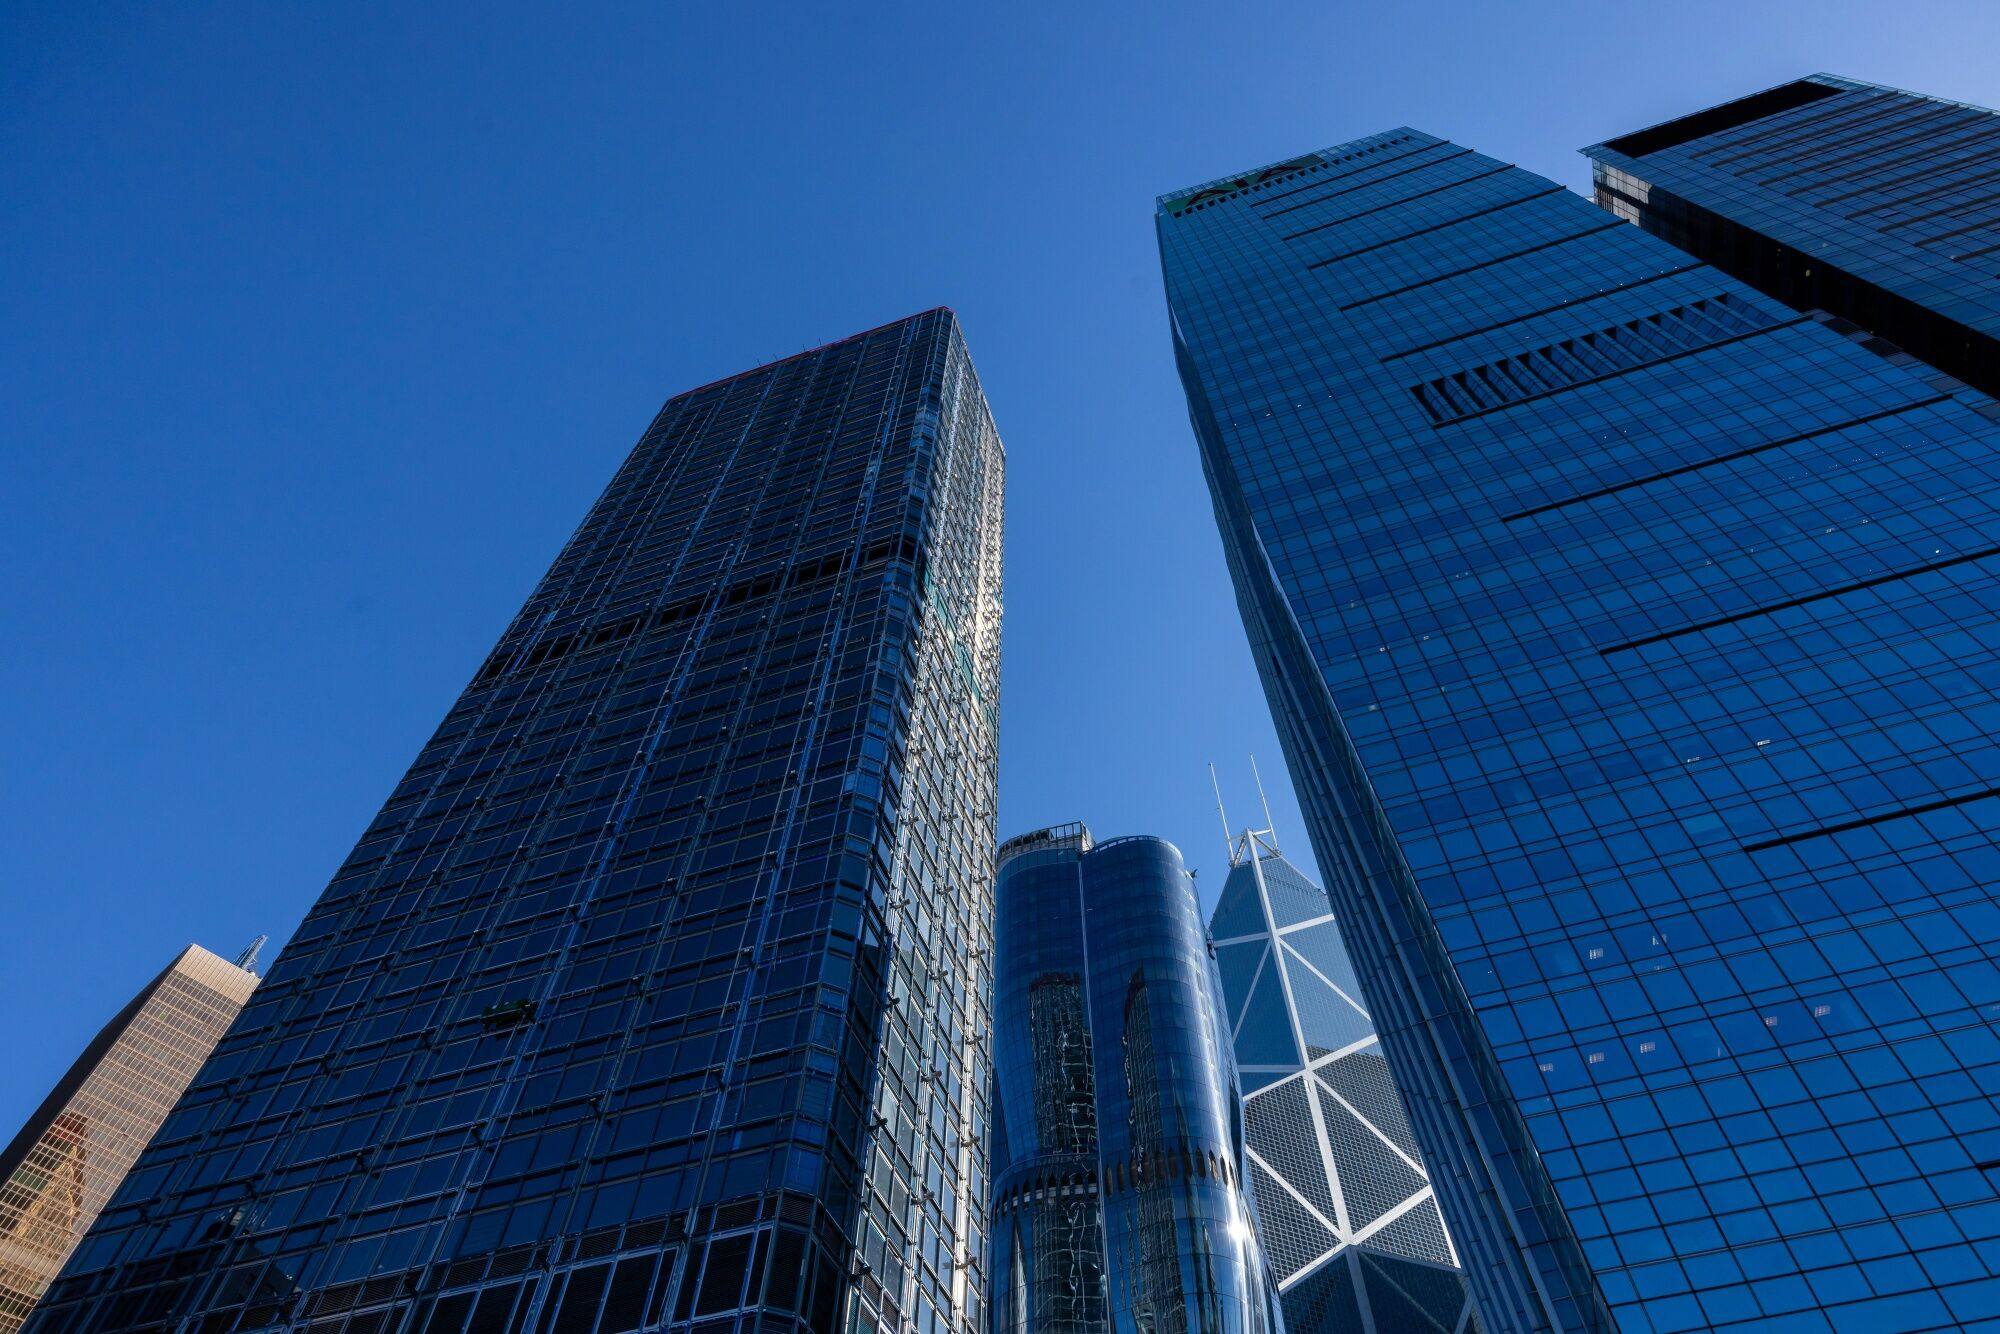 The office market in Hong Kong has experienced one of its longest streaks of double-digit vacancy rates, as tenants give up space and new buildings bolster supply. Photo: Bloomberg